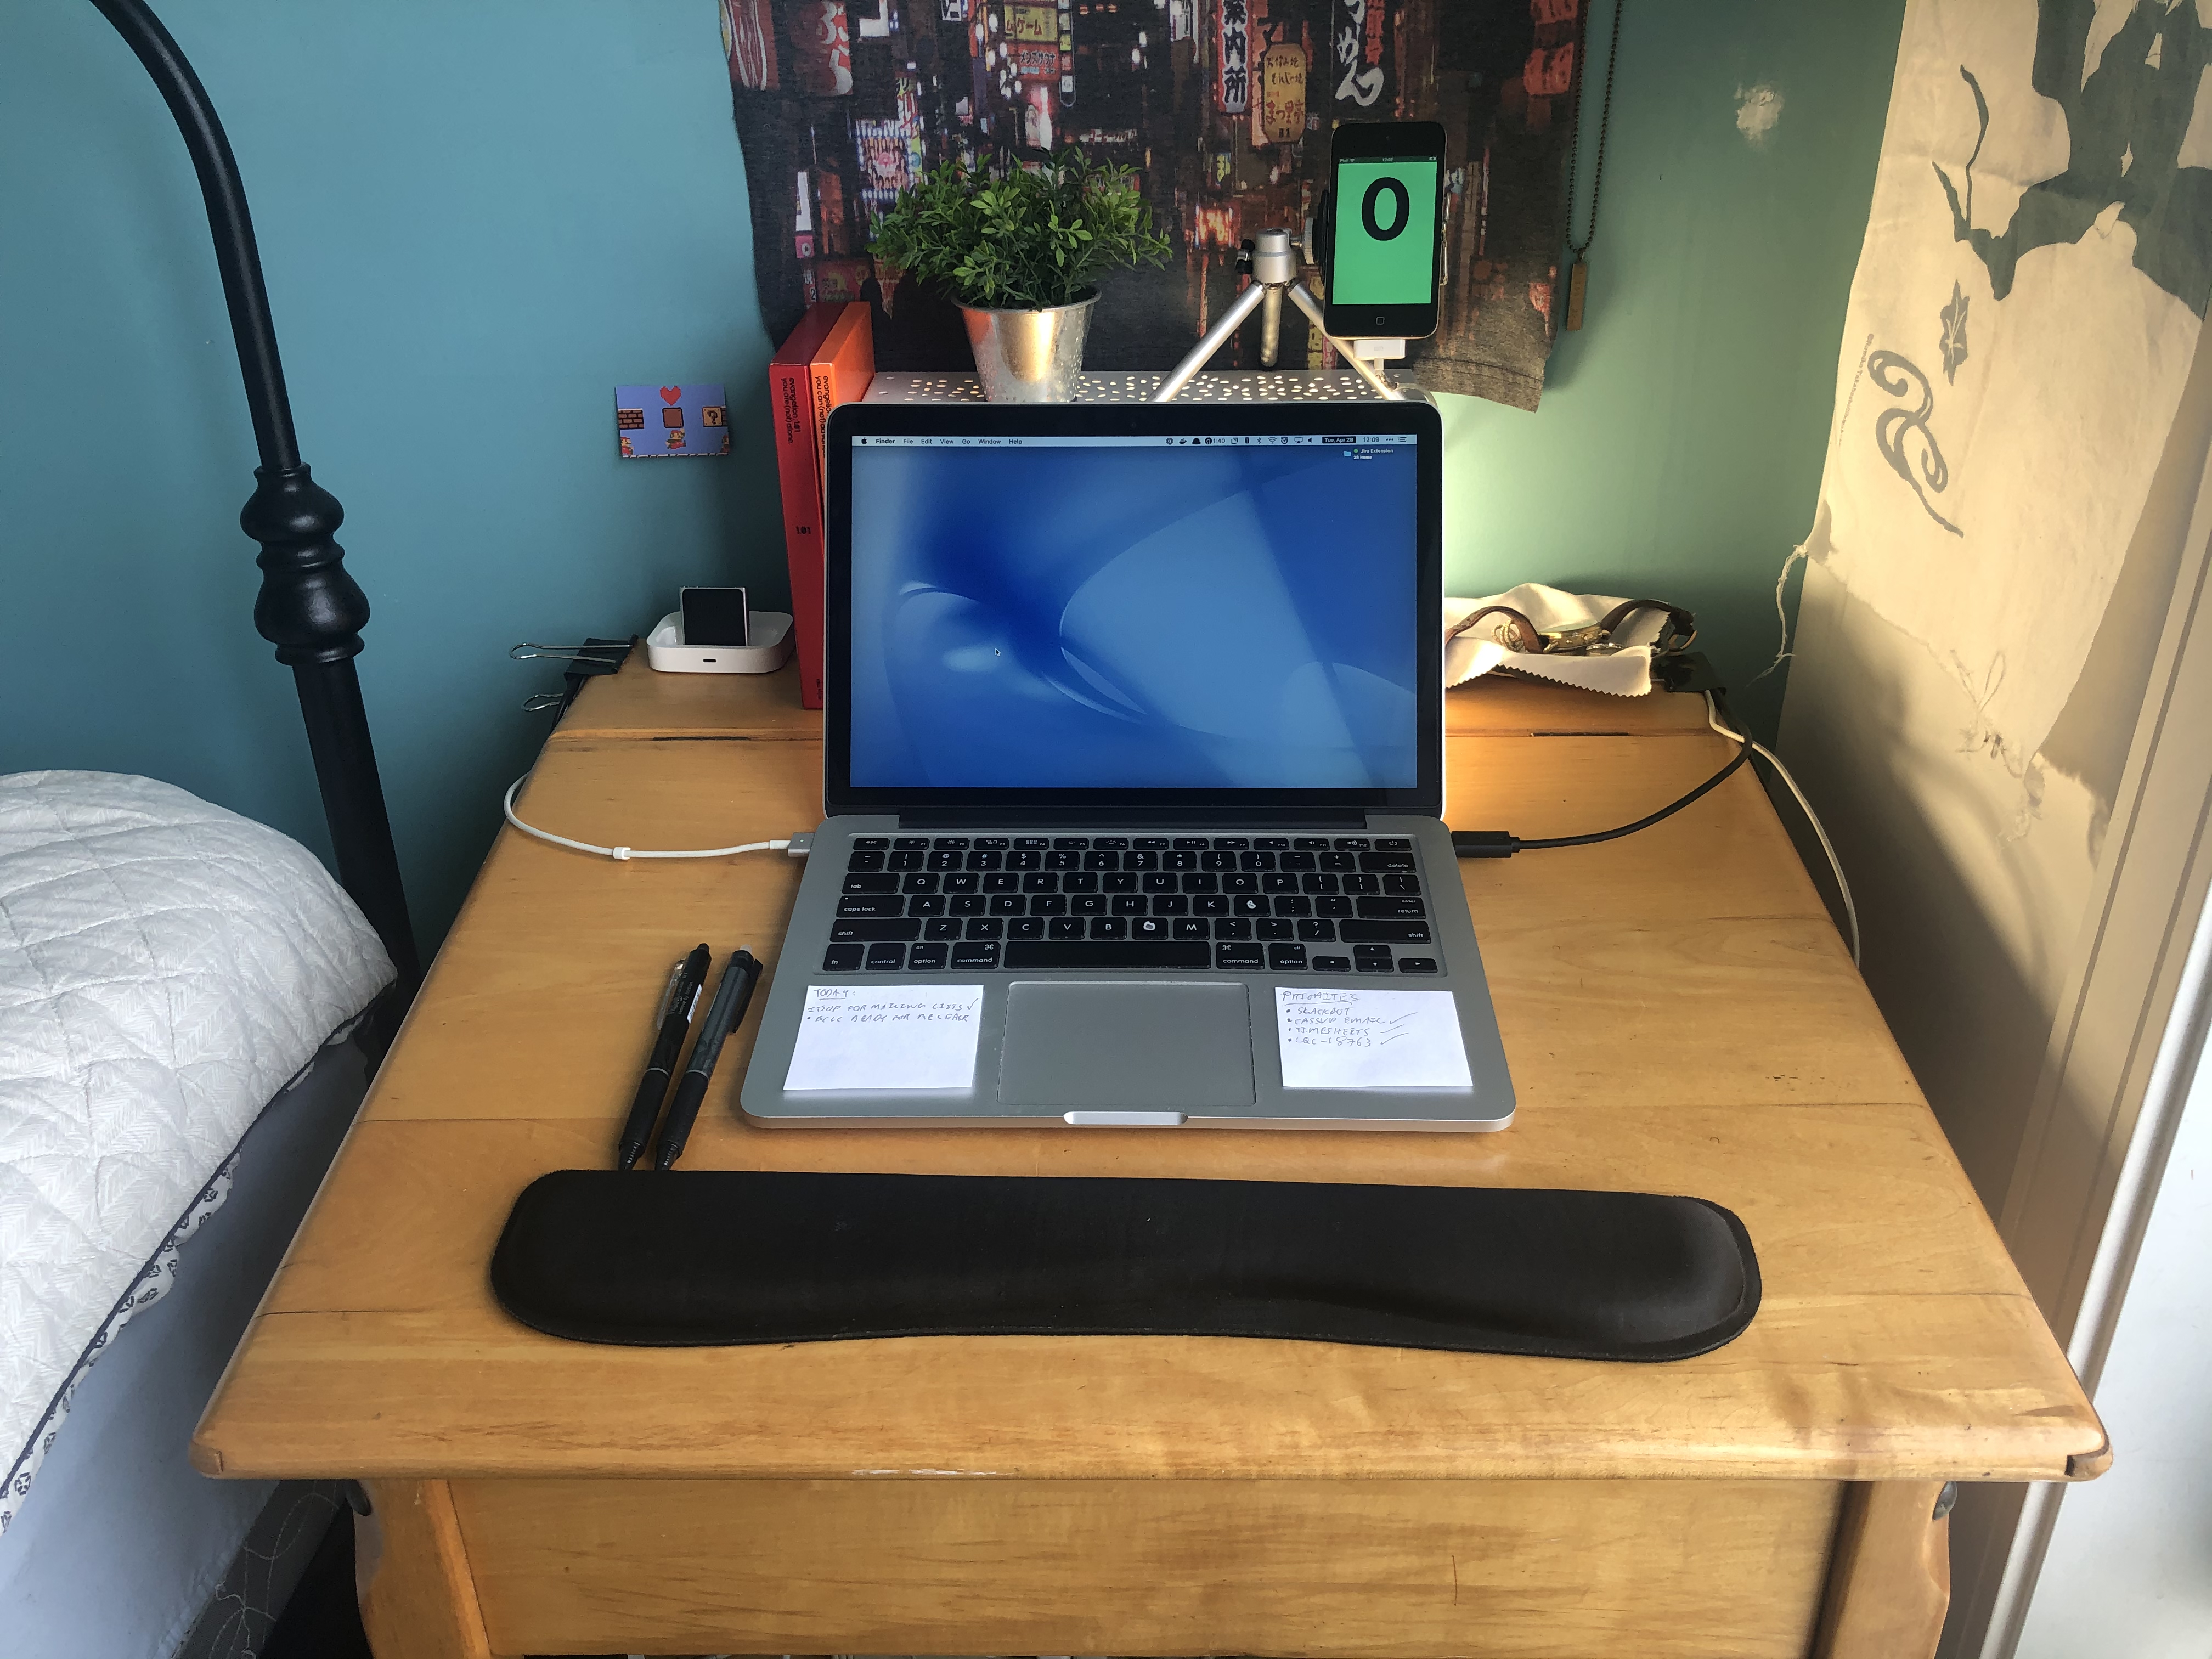 A laptop sits on a traditional wooden school desk. In front of it is a wrist rest, and to the right is an iPod Touch mounted on a small metal tripod. The laptop has two small pieces of paper on it either side of the trackpad, and two pens placed to its left.